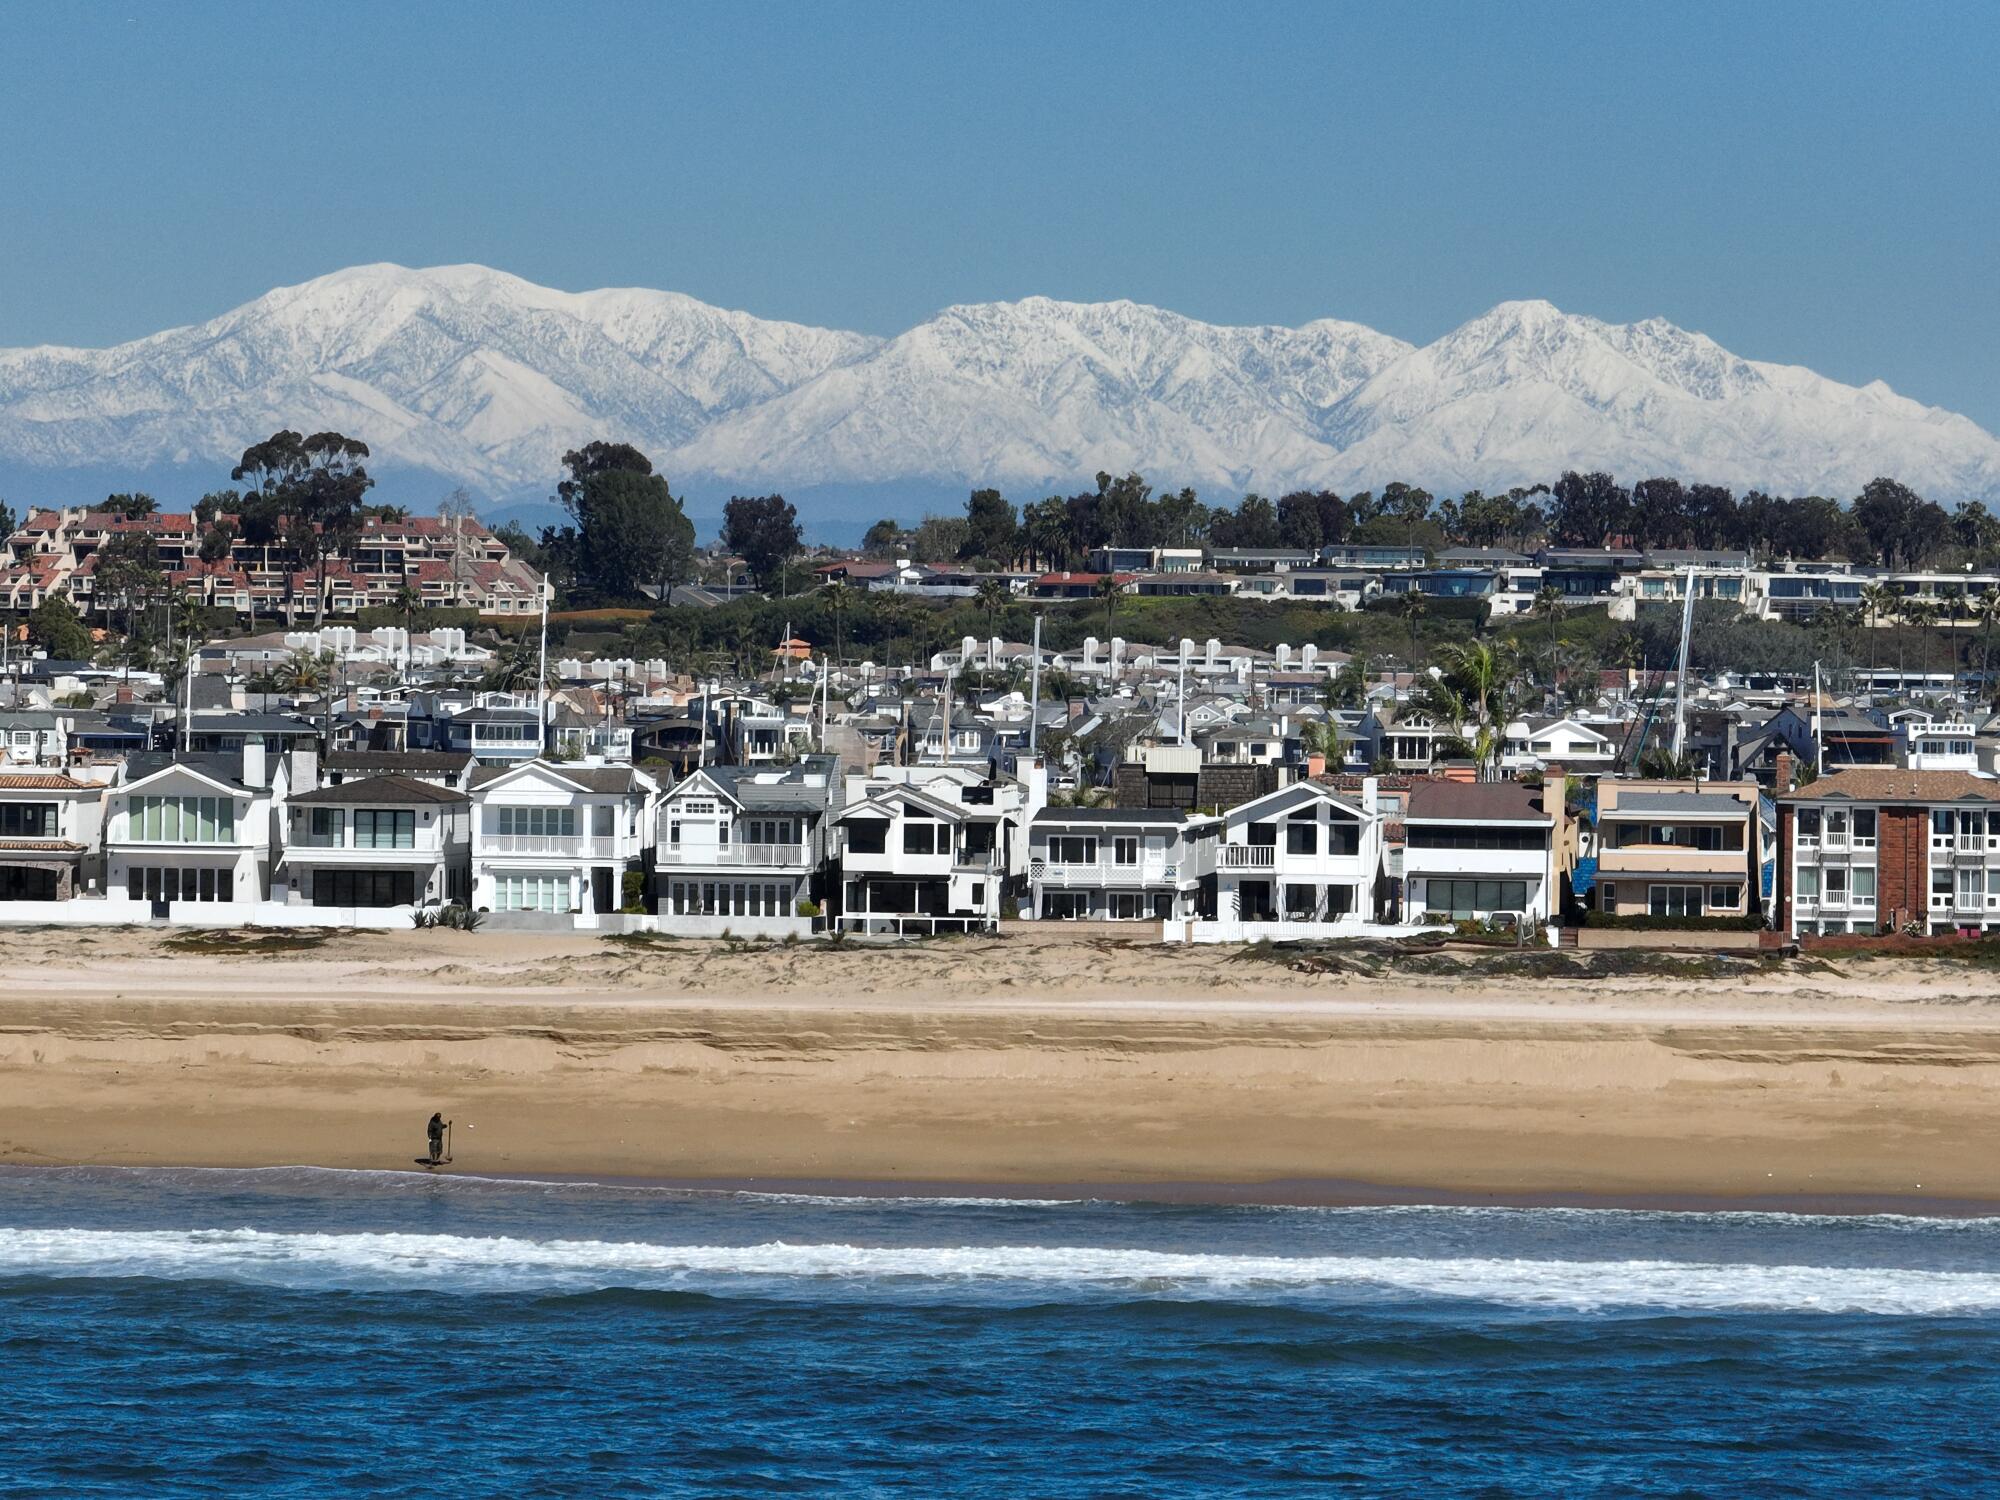 An aerial view of the surf, a beach comber and a panoramic view of snow-capped San Gabriel Mountains.